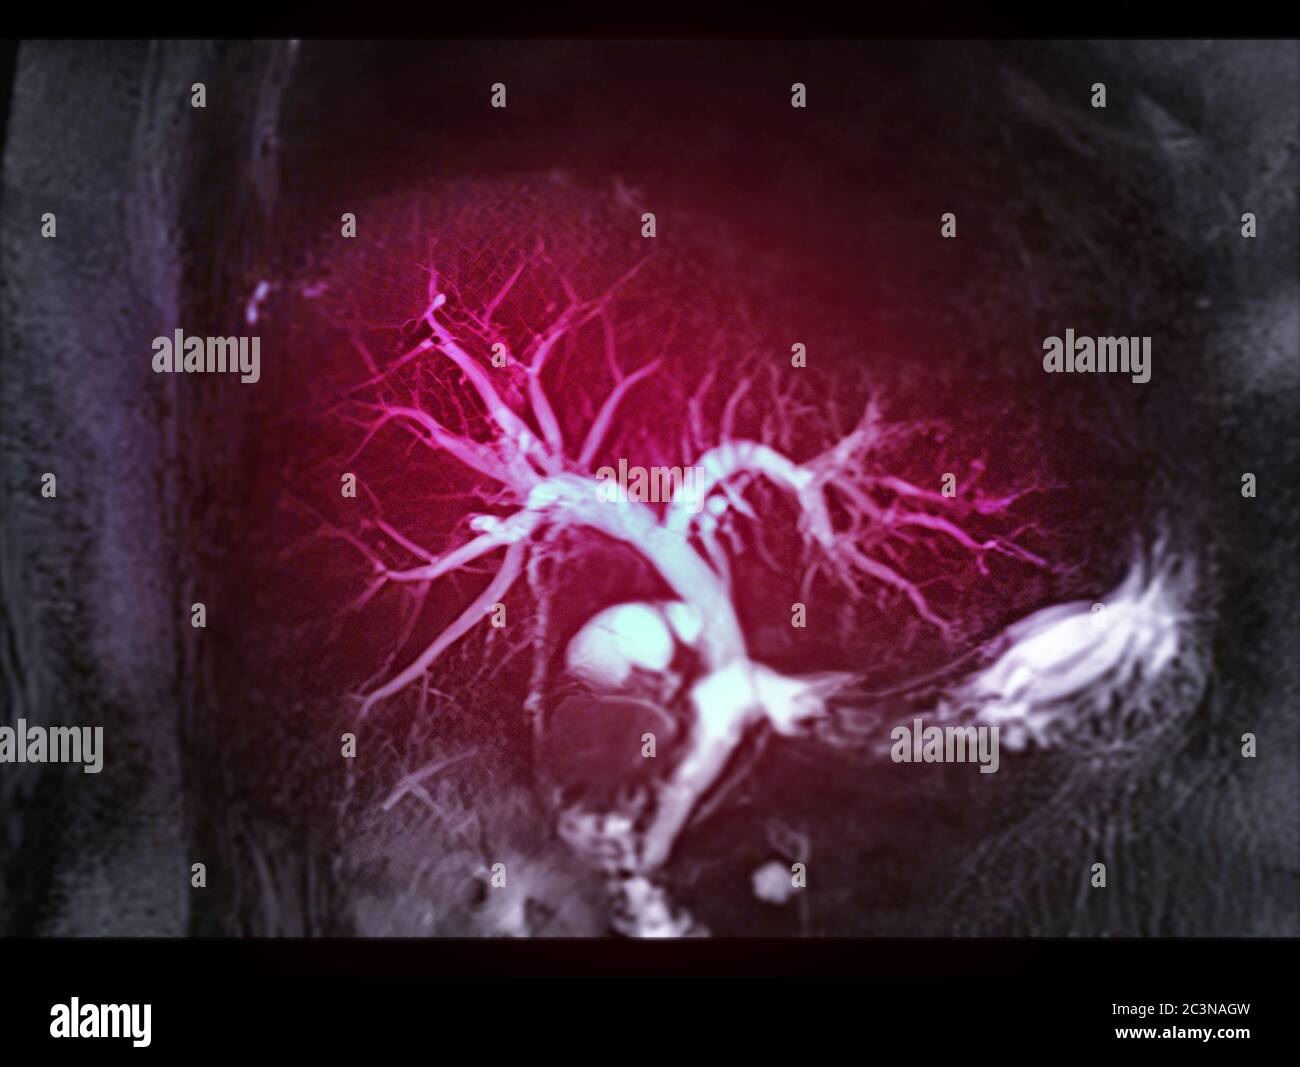 Magnetic resonance cholangiopancreatography or MRCP 3D MIP image showing  visualize the biliary and pancreatic ducts Stock Photo - Alamy